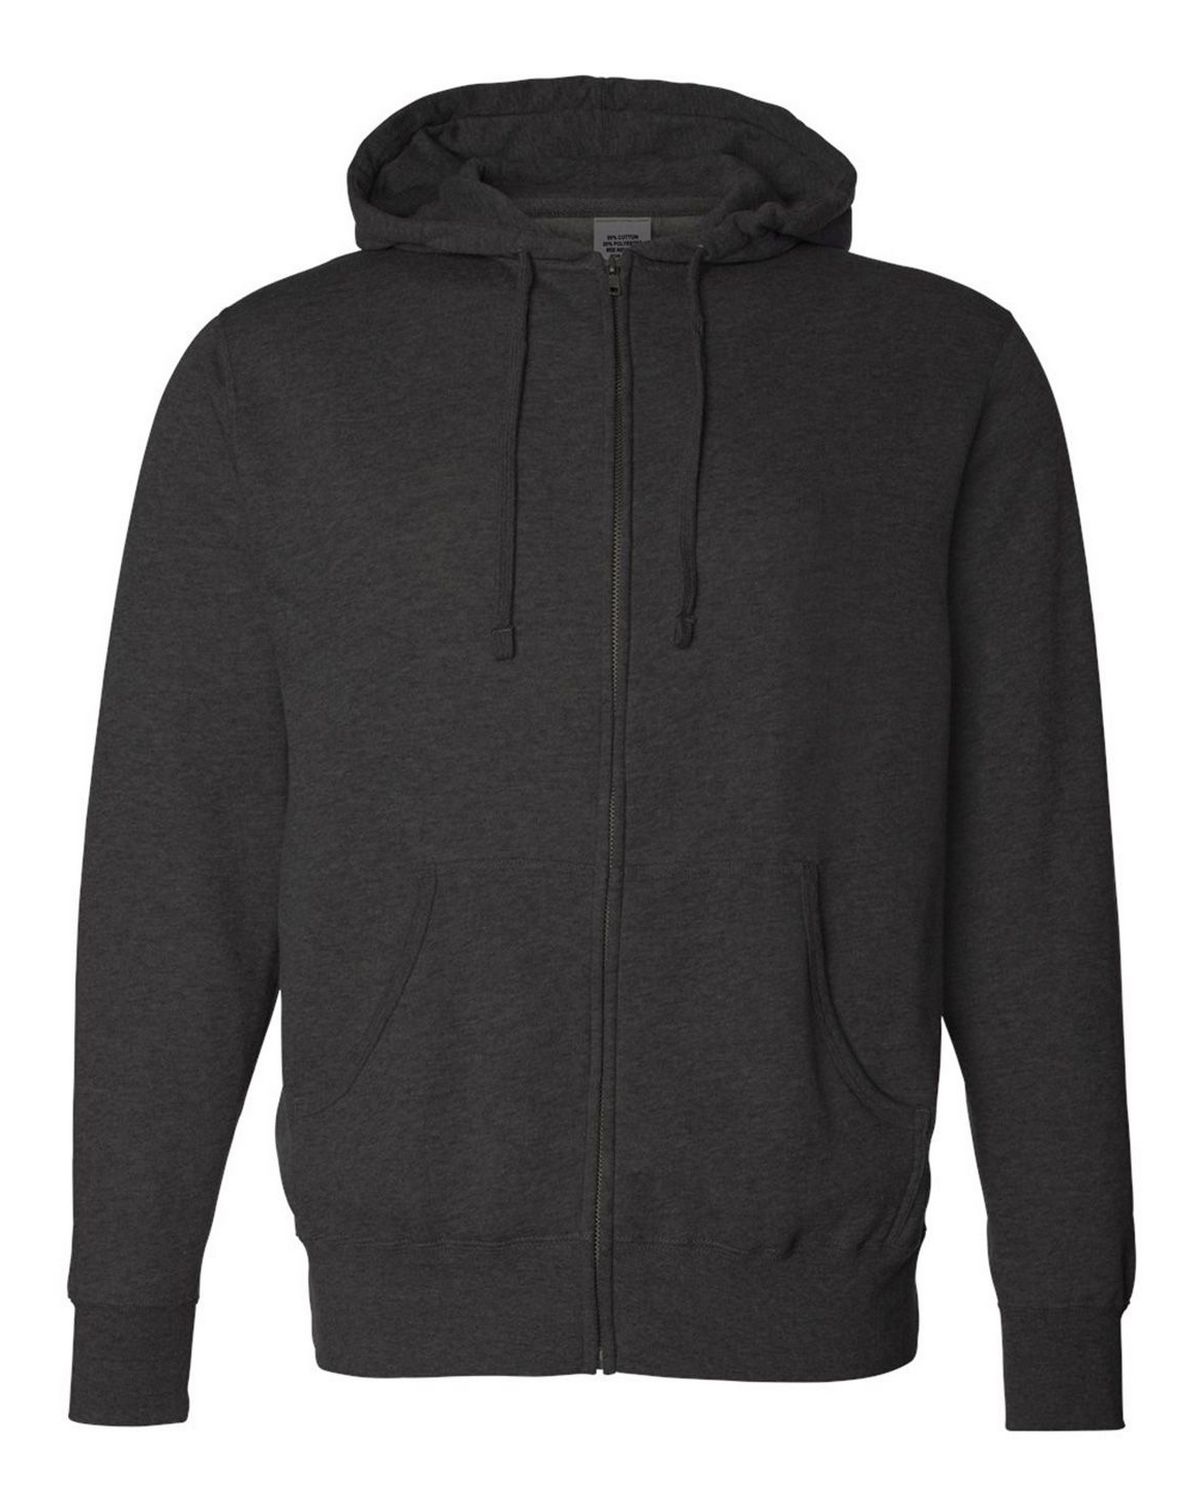 Independent Trading Co. AFX4000Z Mens Full-Zip Hooded Sweatshirt